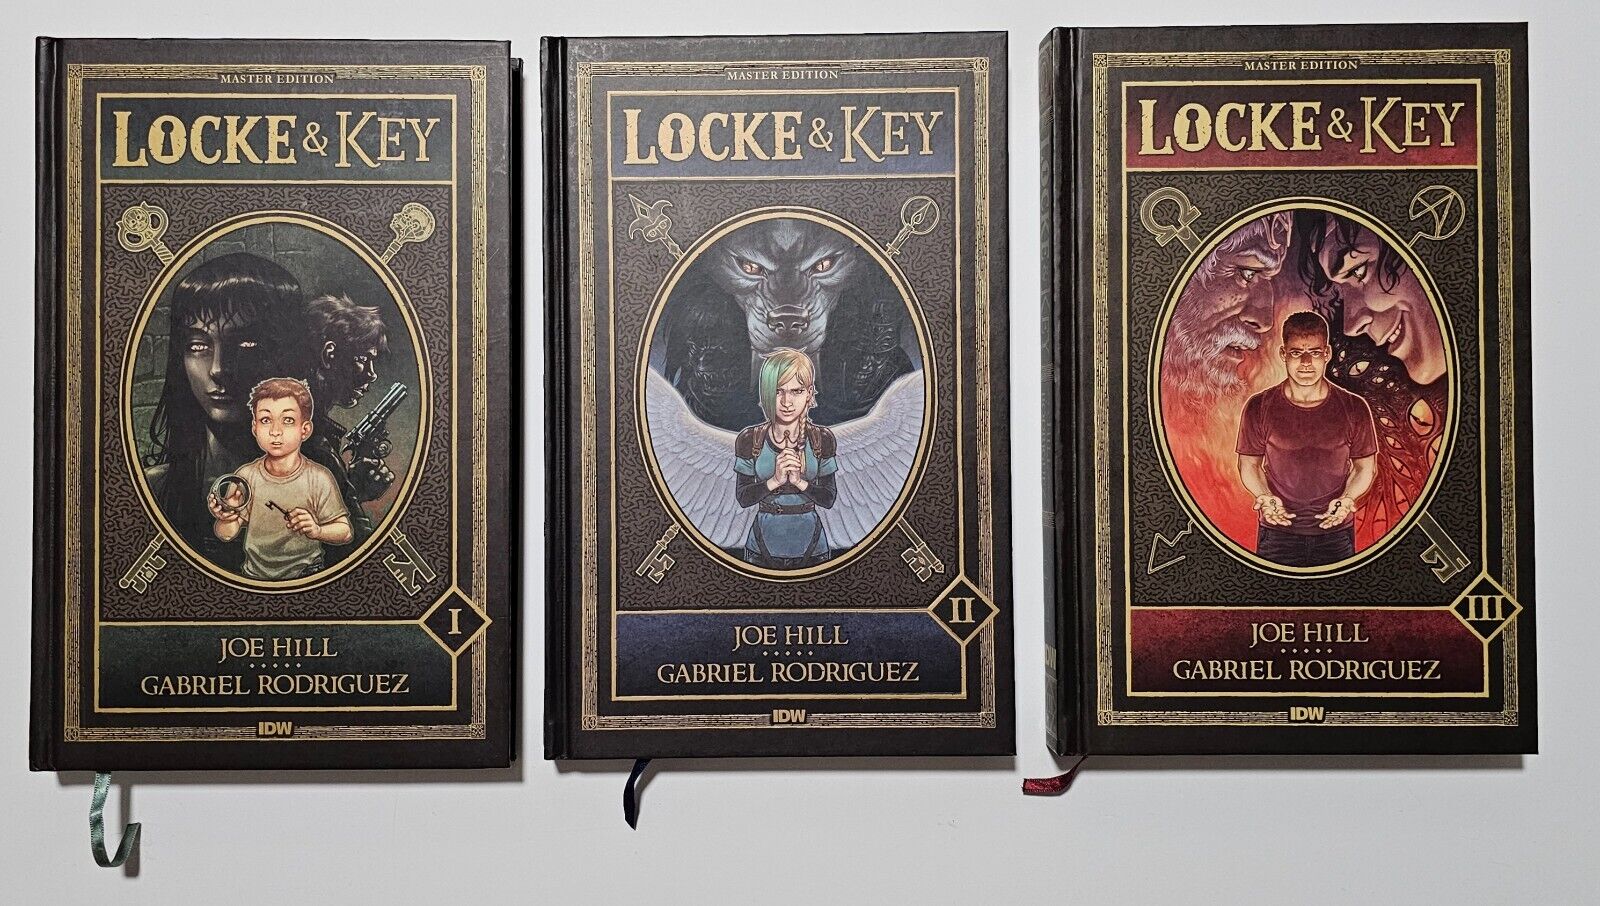 Locke and Key Master Edition Complete Hardcover Set 1 2 3 (IDW)